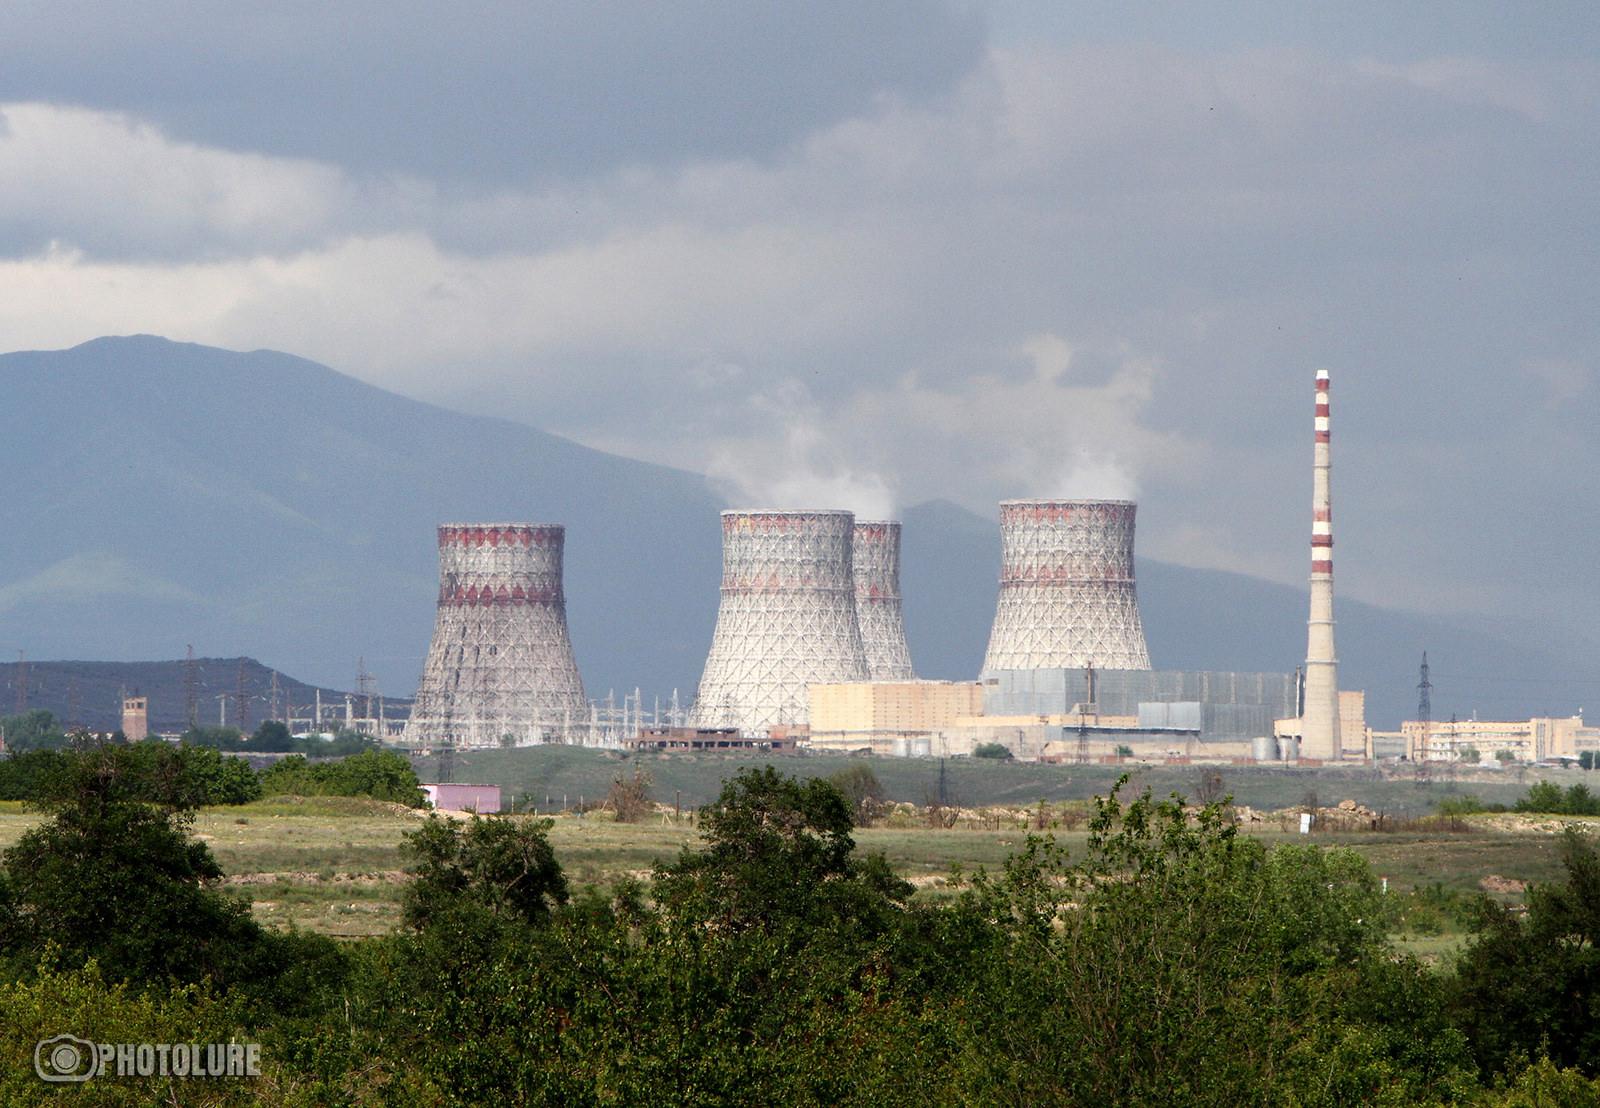 PODCAST: Armenia's Energy Sector in Transition